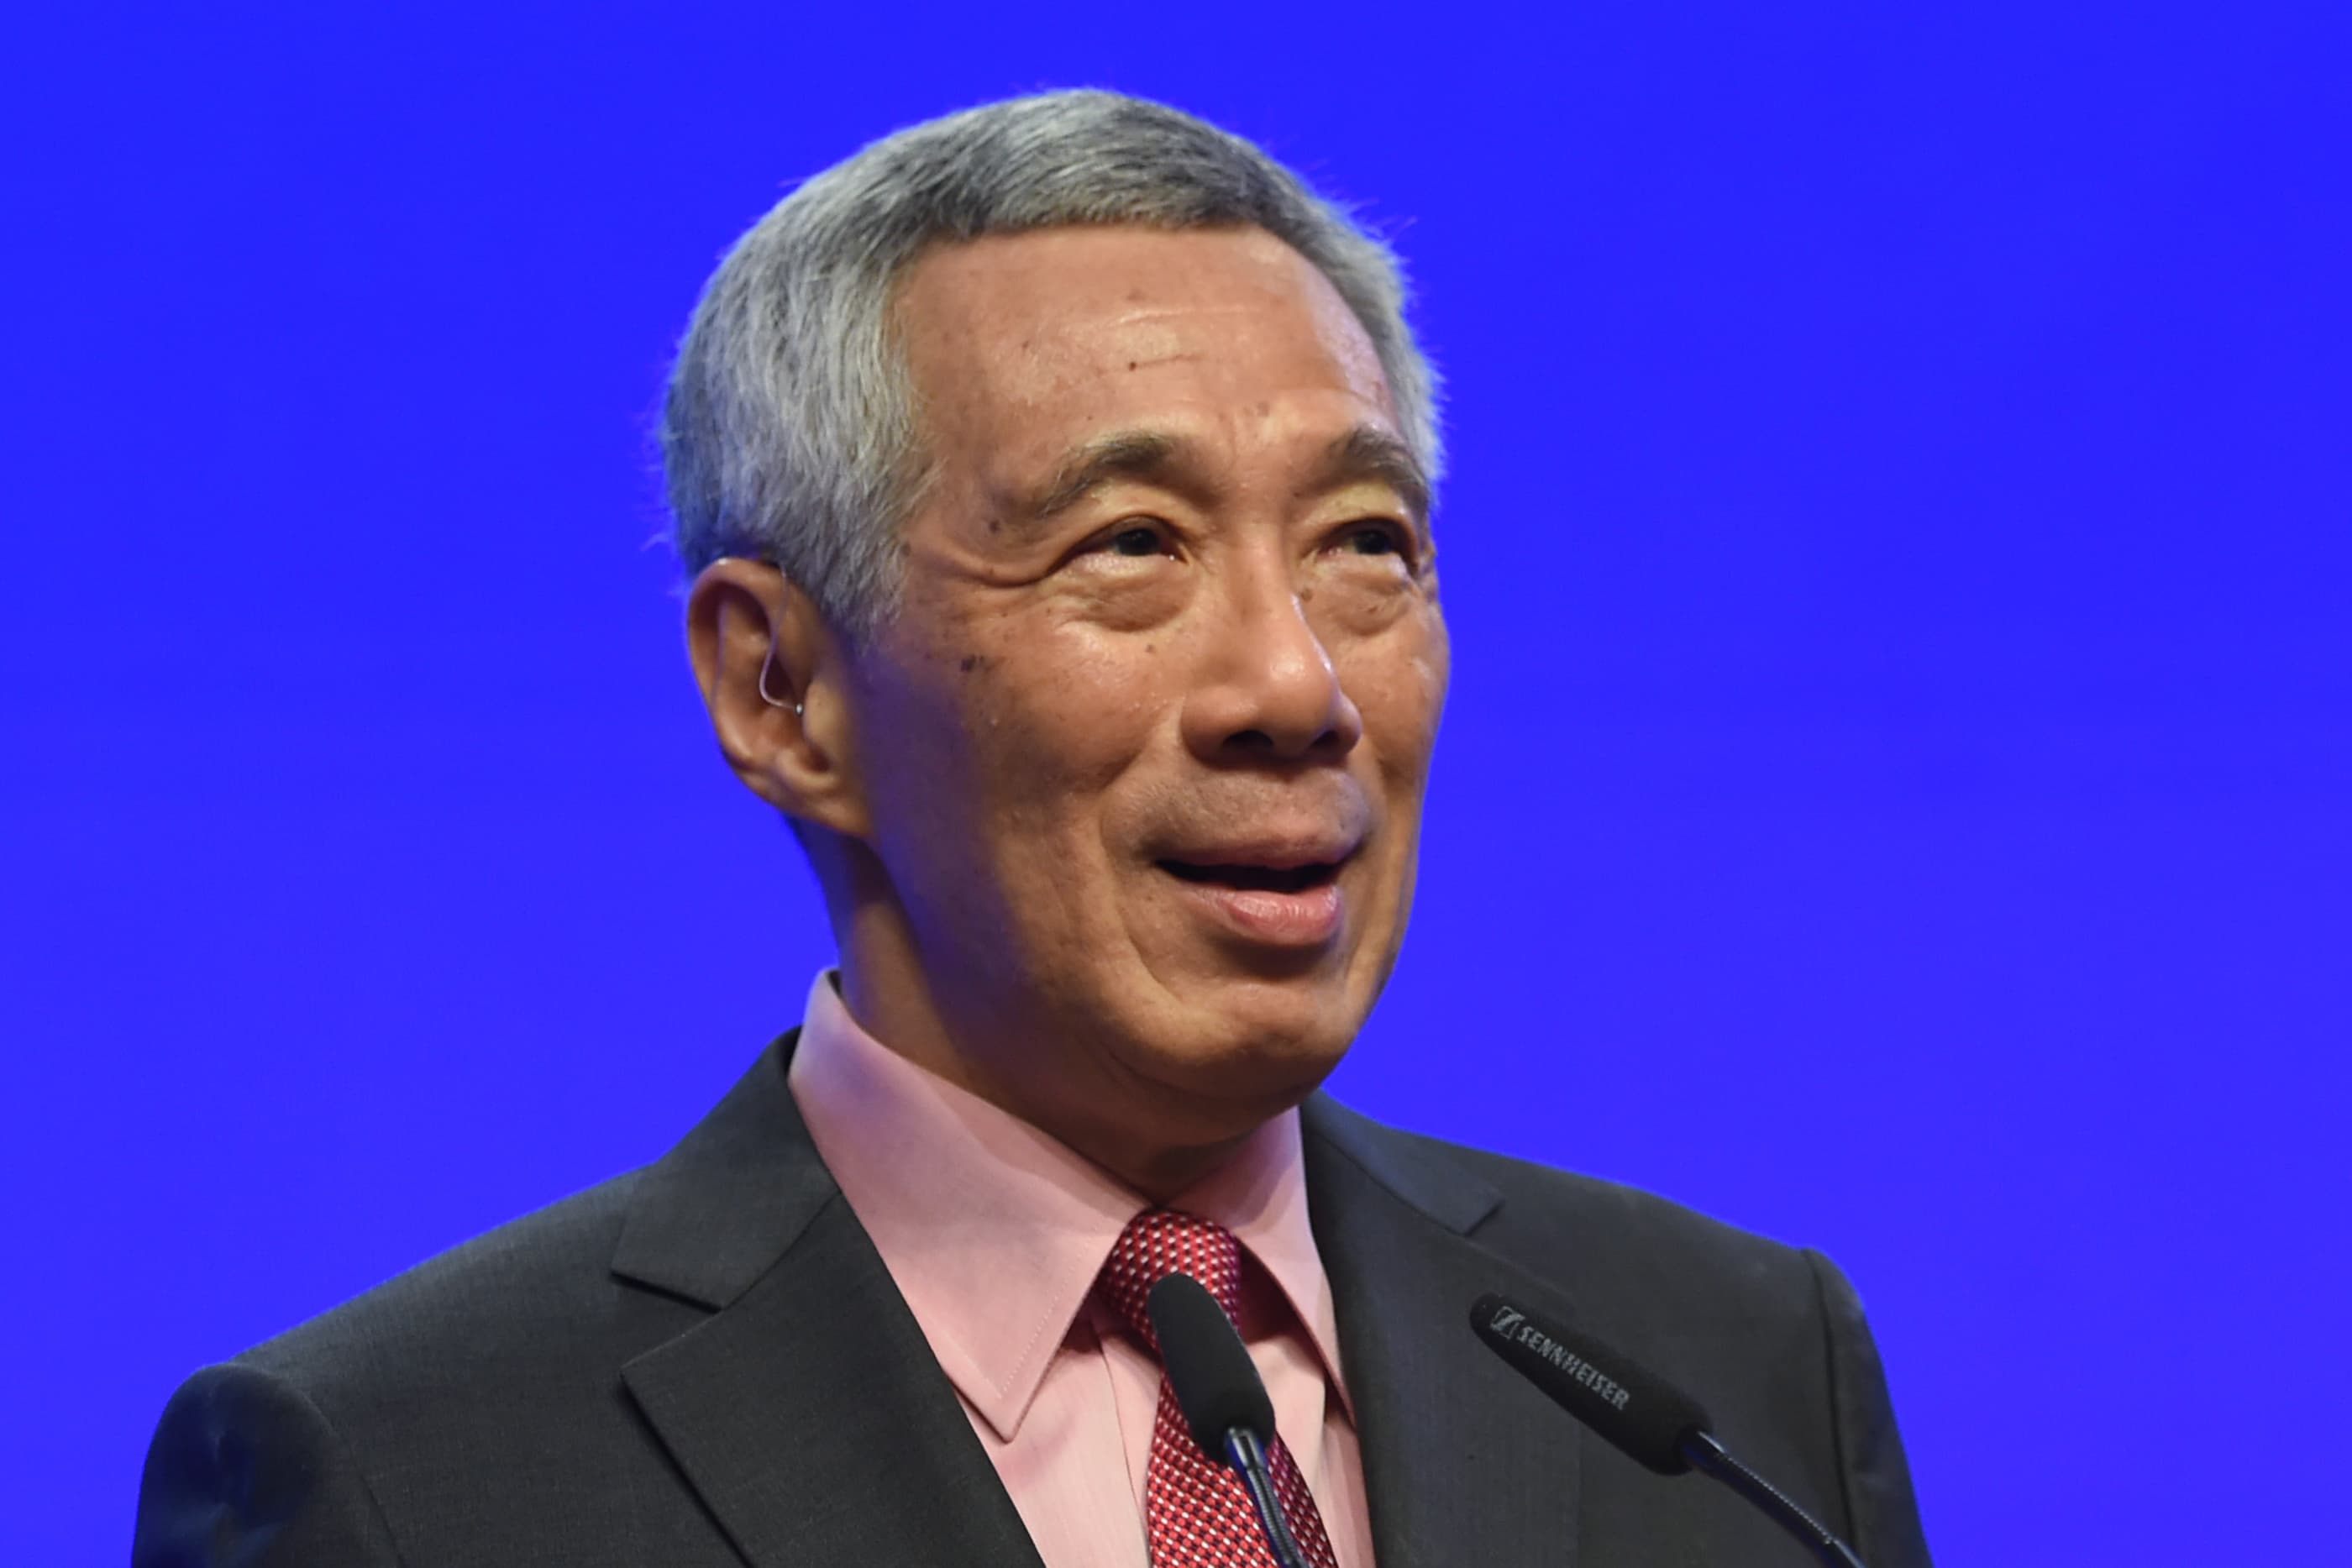 Covid 19 singapore lee hsien loong